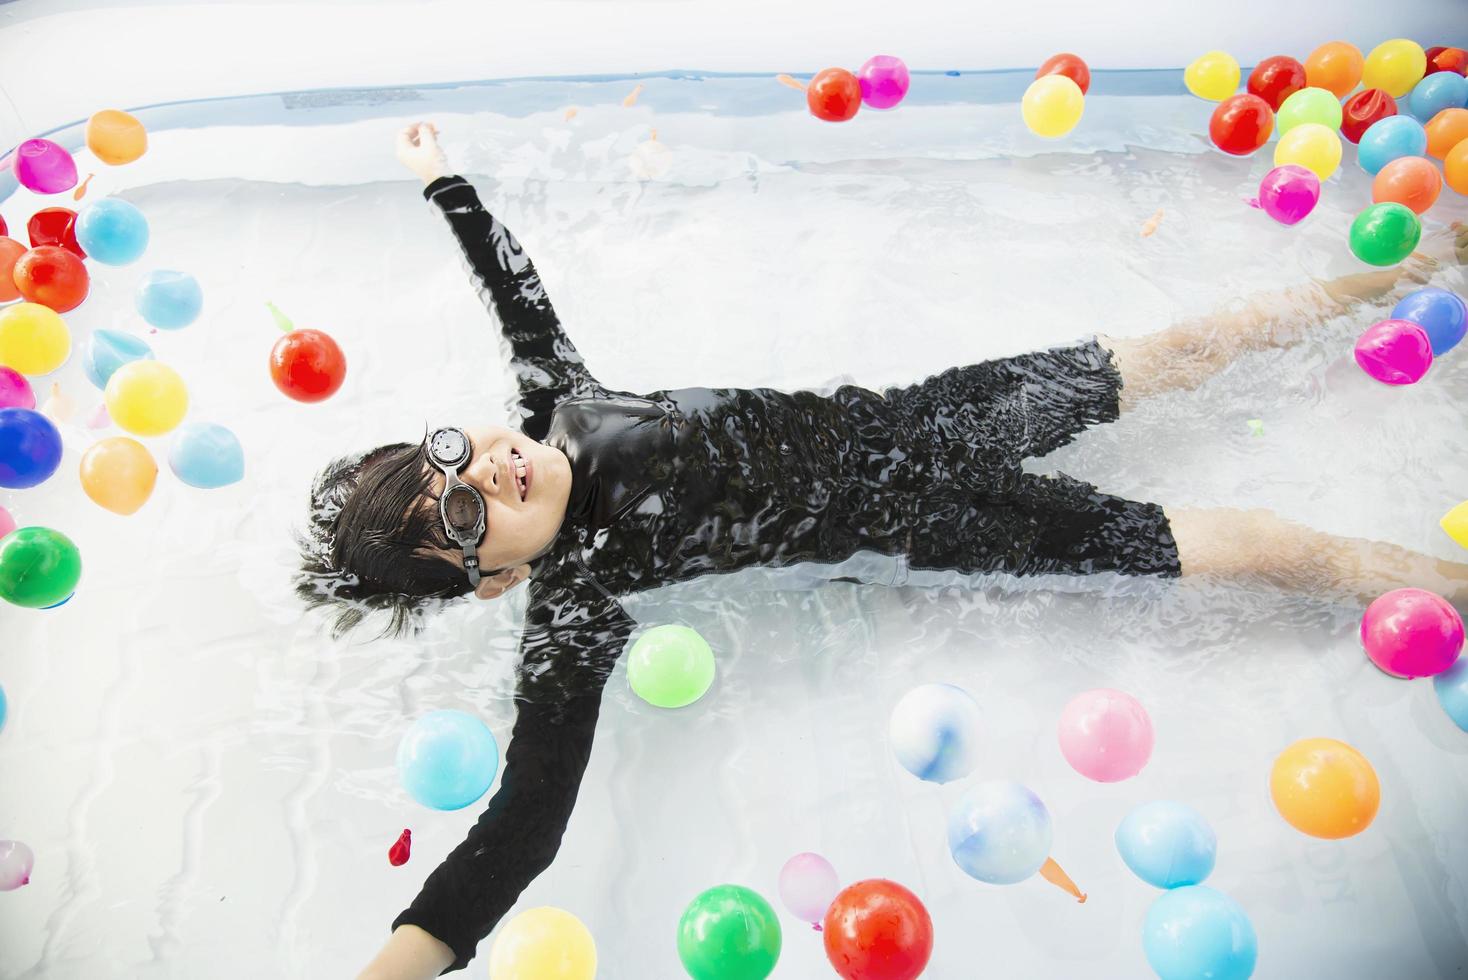 Boy playing with colourful ball in small swimming pool toy - happy boy in water pool toy concept photo